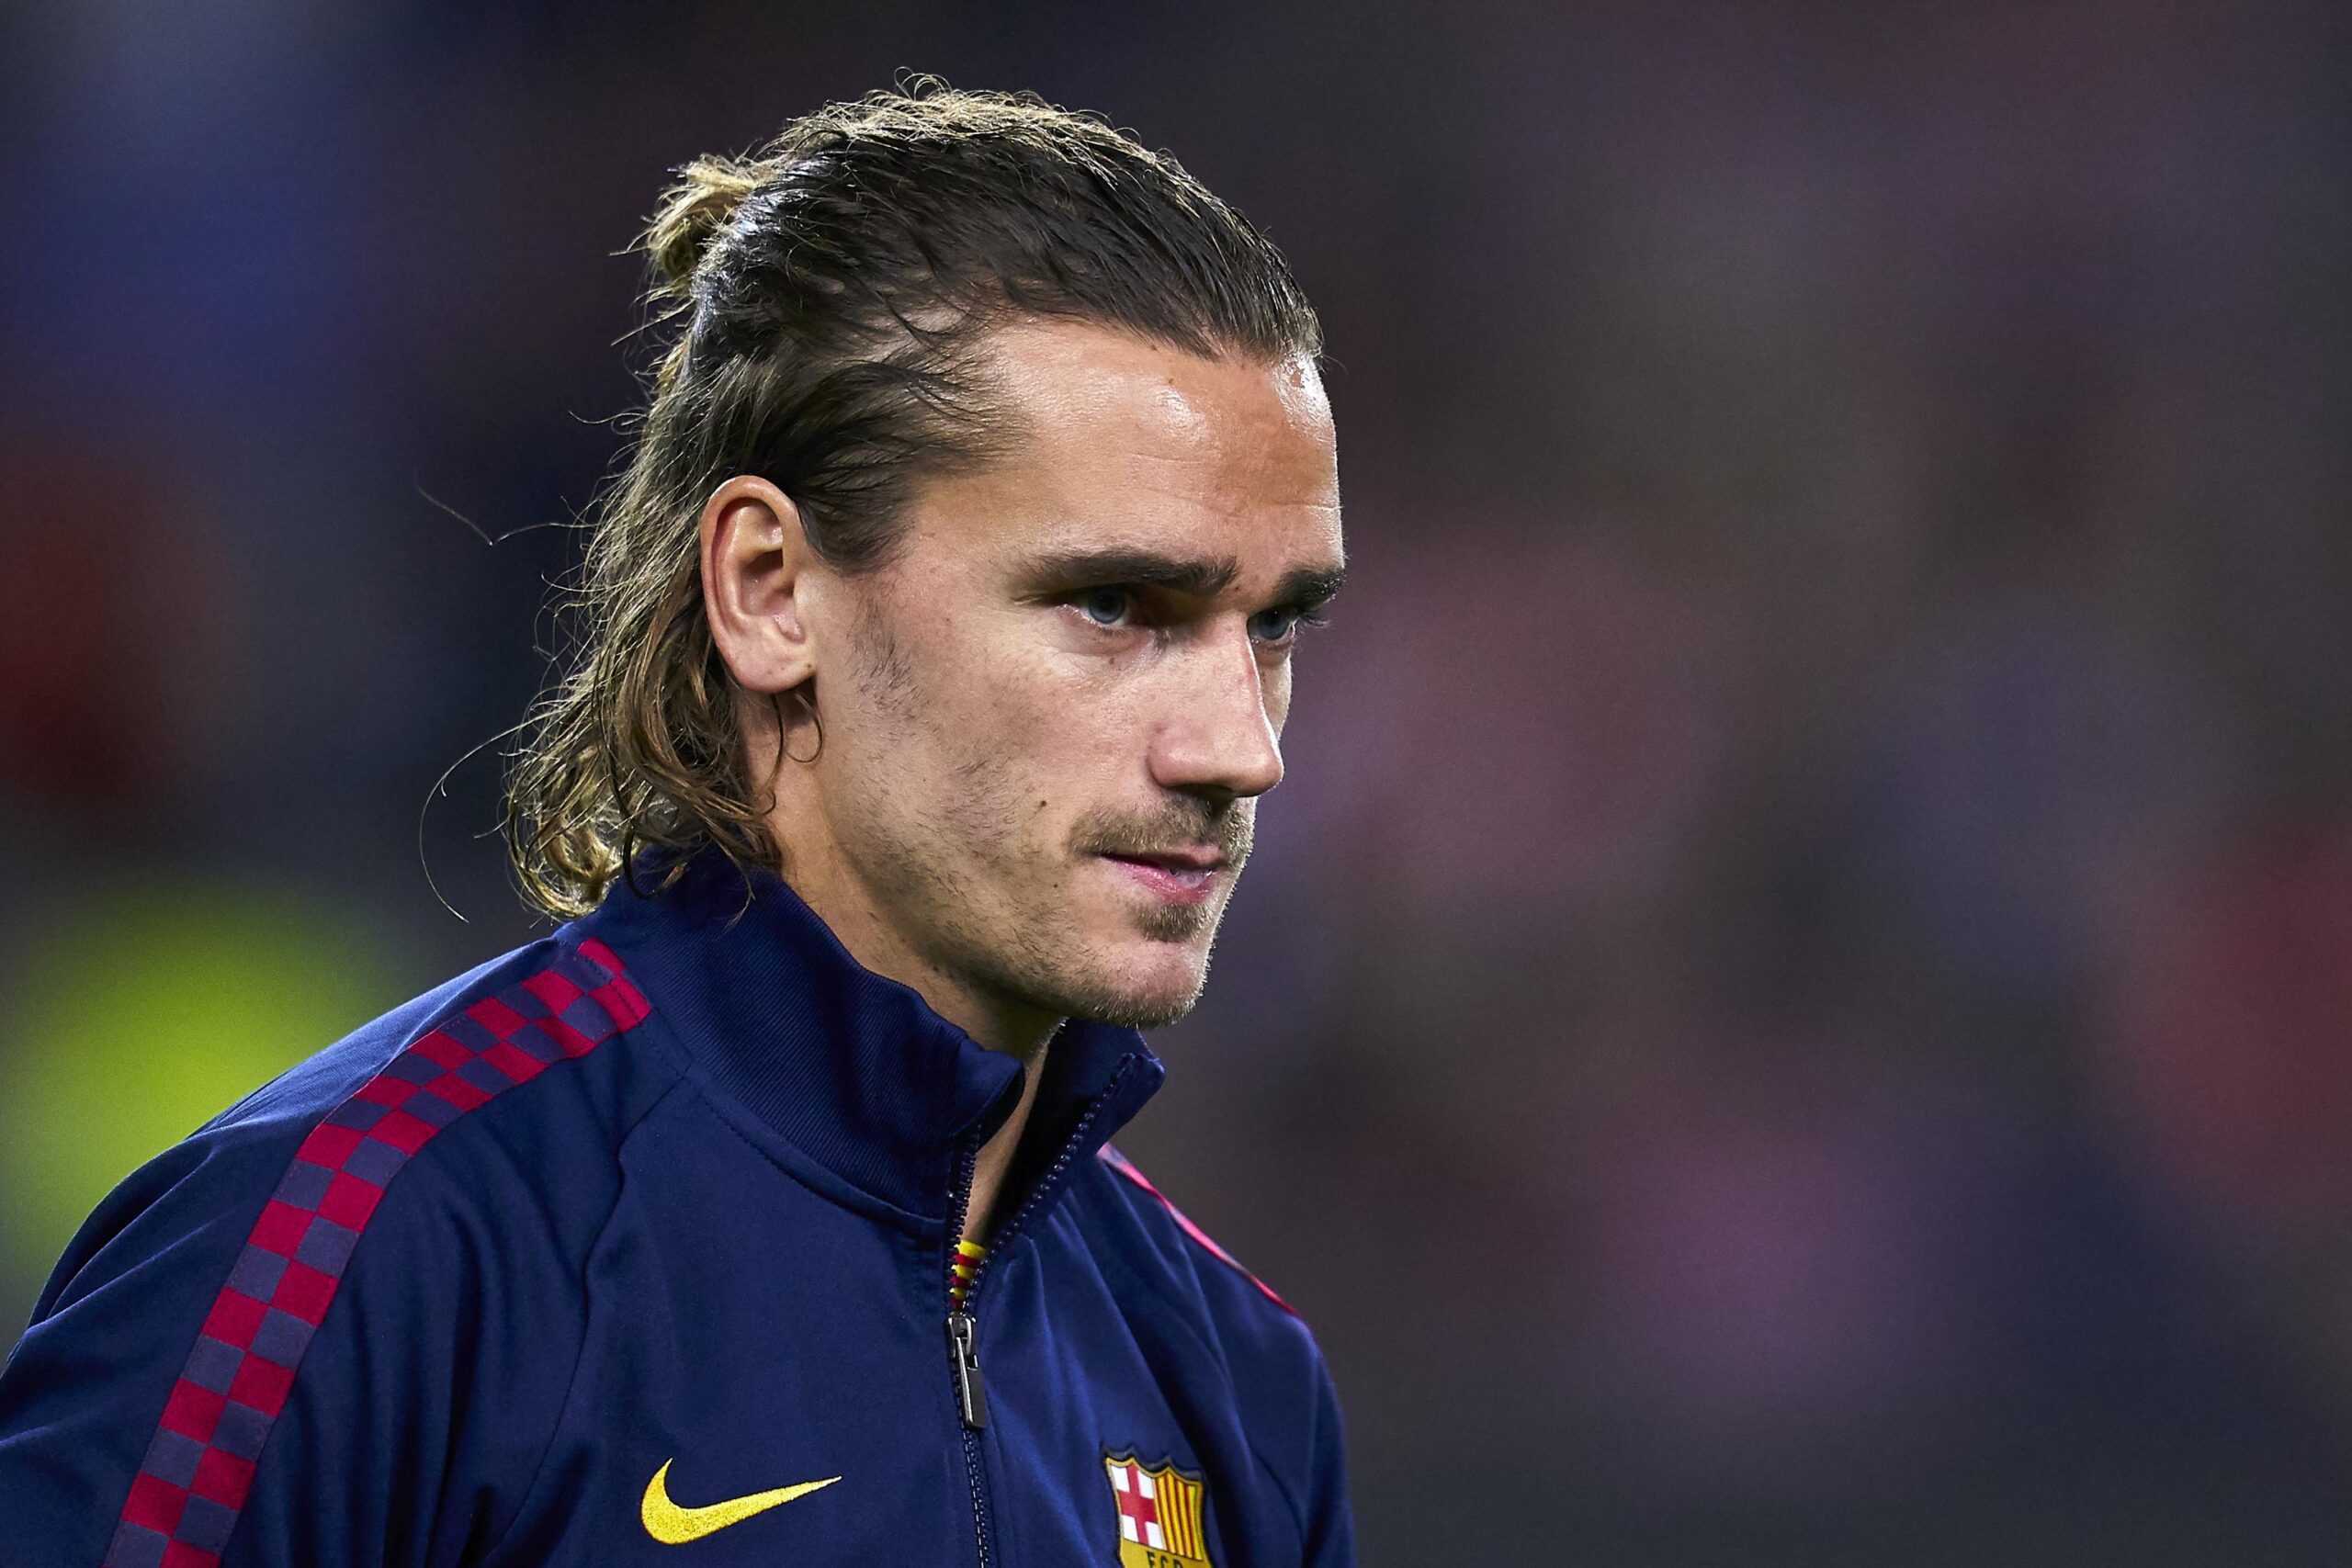 The top 5 Antoine Griezmann hairstyles from his playing career